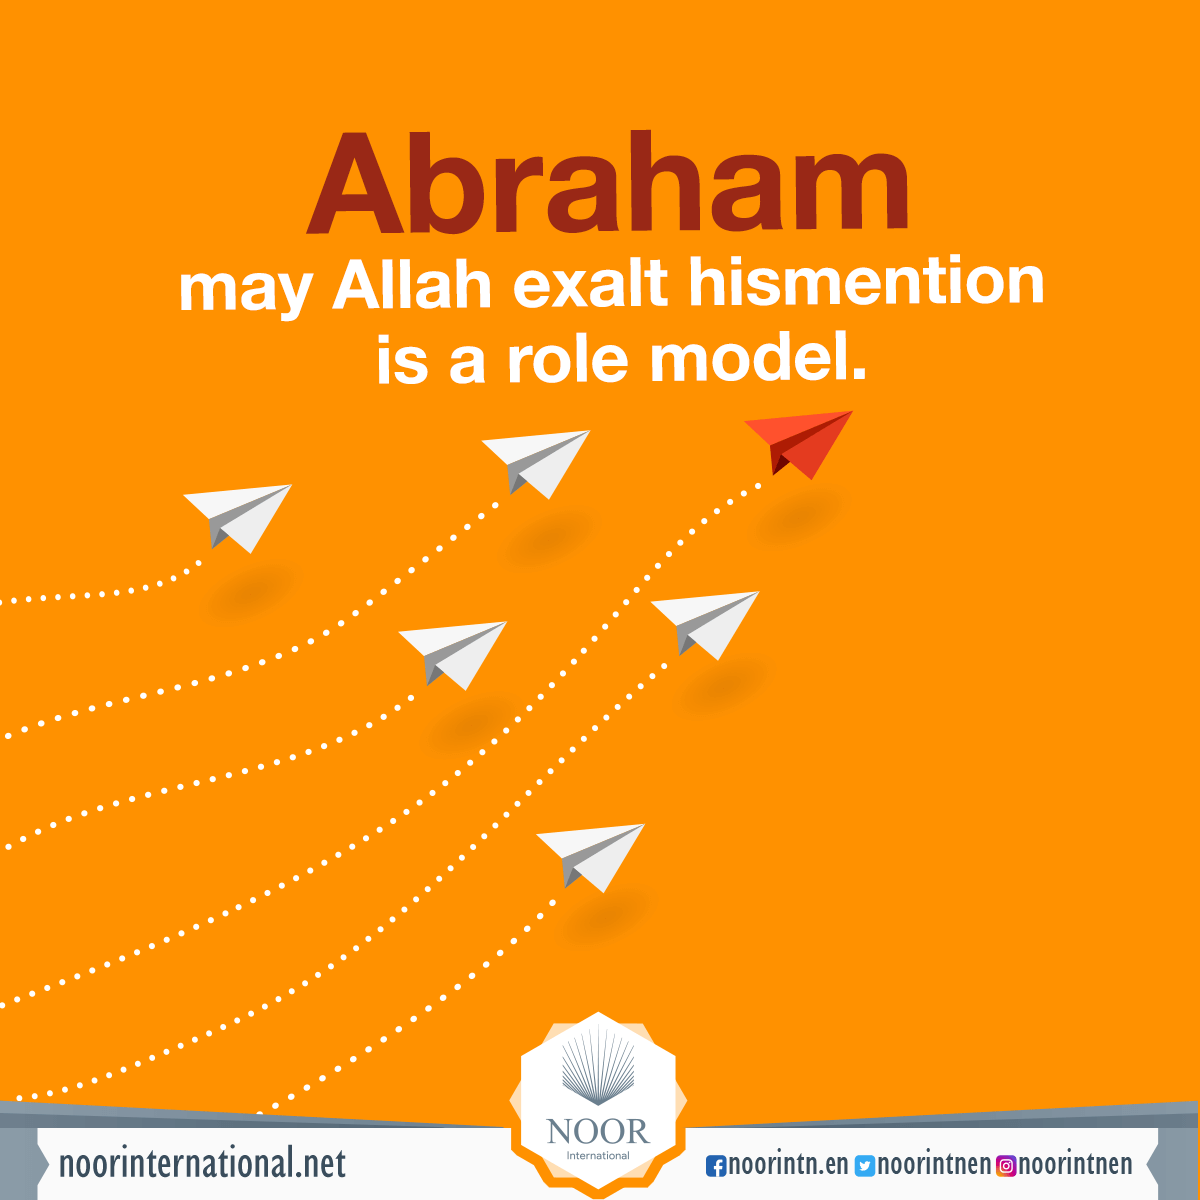 Abraham, may Allah exalt his mention, is a role model.